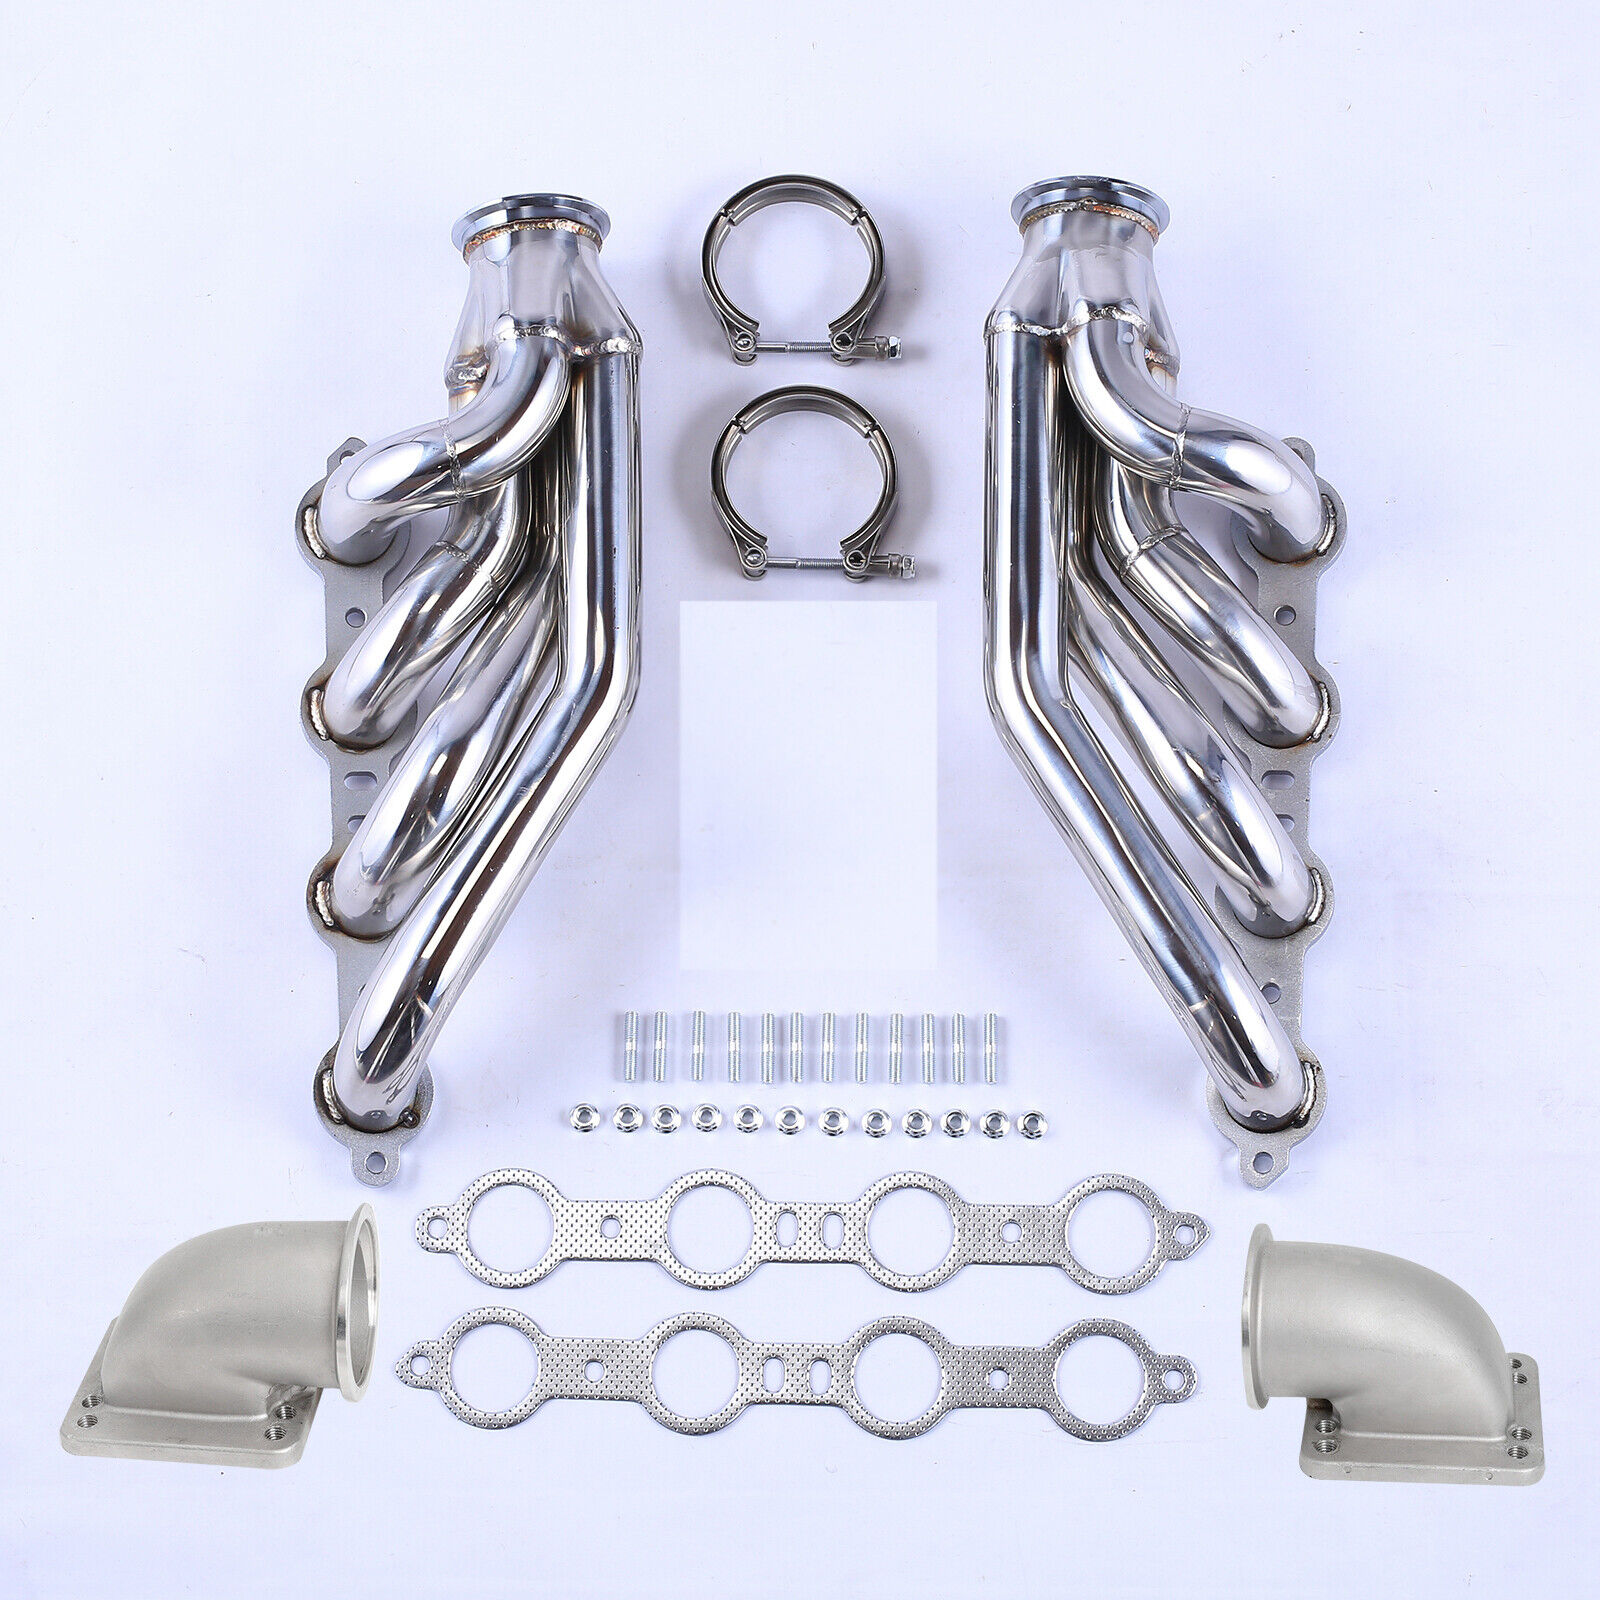 Turbo Exhaust Manifold&Headers For LS1 LS6 LSX GM V8+Elbows T3 T4 to 3.0